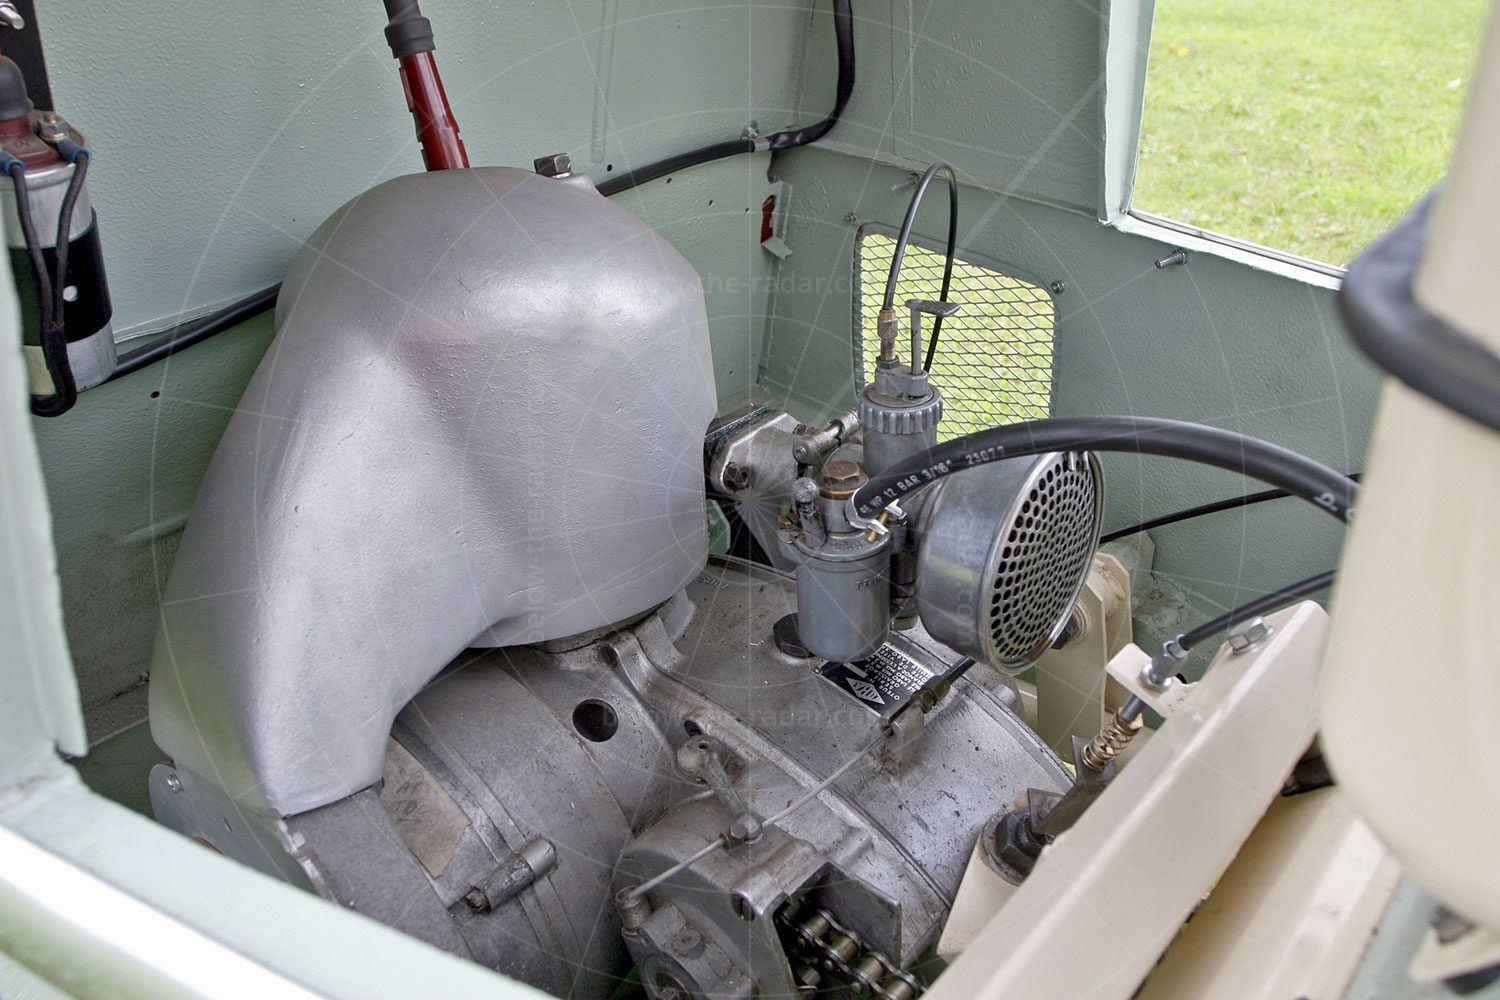 SNCAN Inter 175A Autoscooter Torpedo engine Pic: magiccarpics.co.uk | SNCAN Inter 175A Autoscooter Torpedo engine